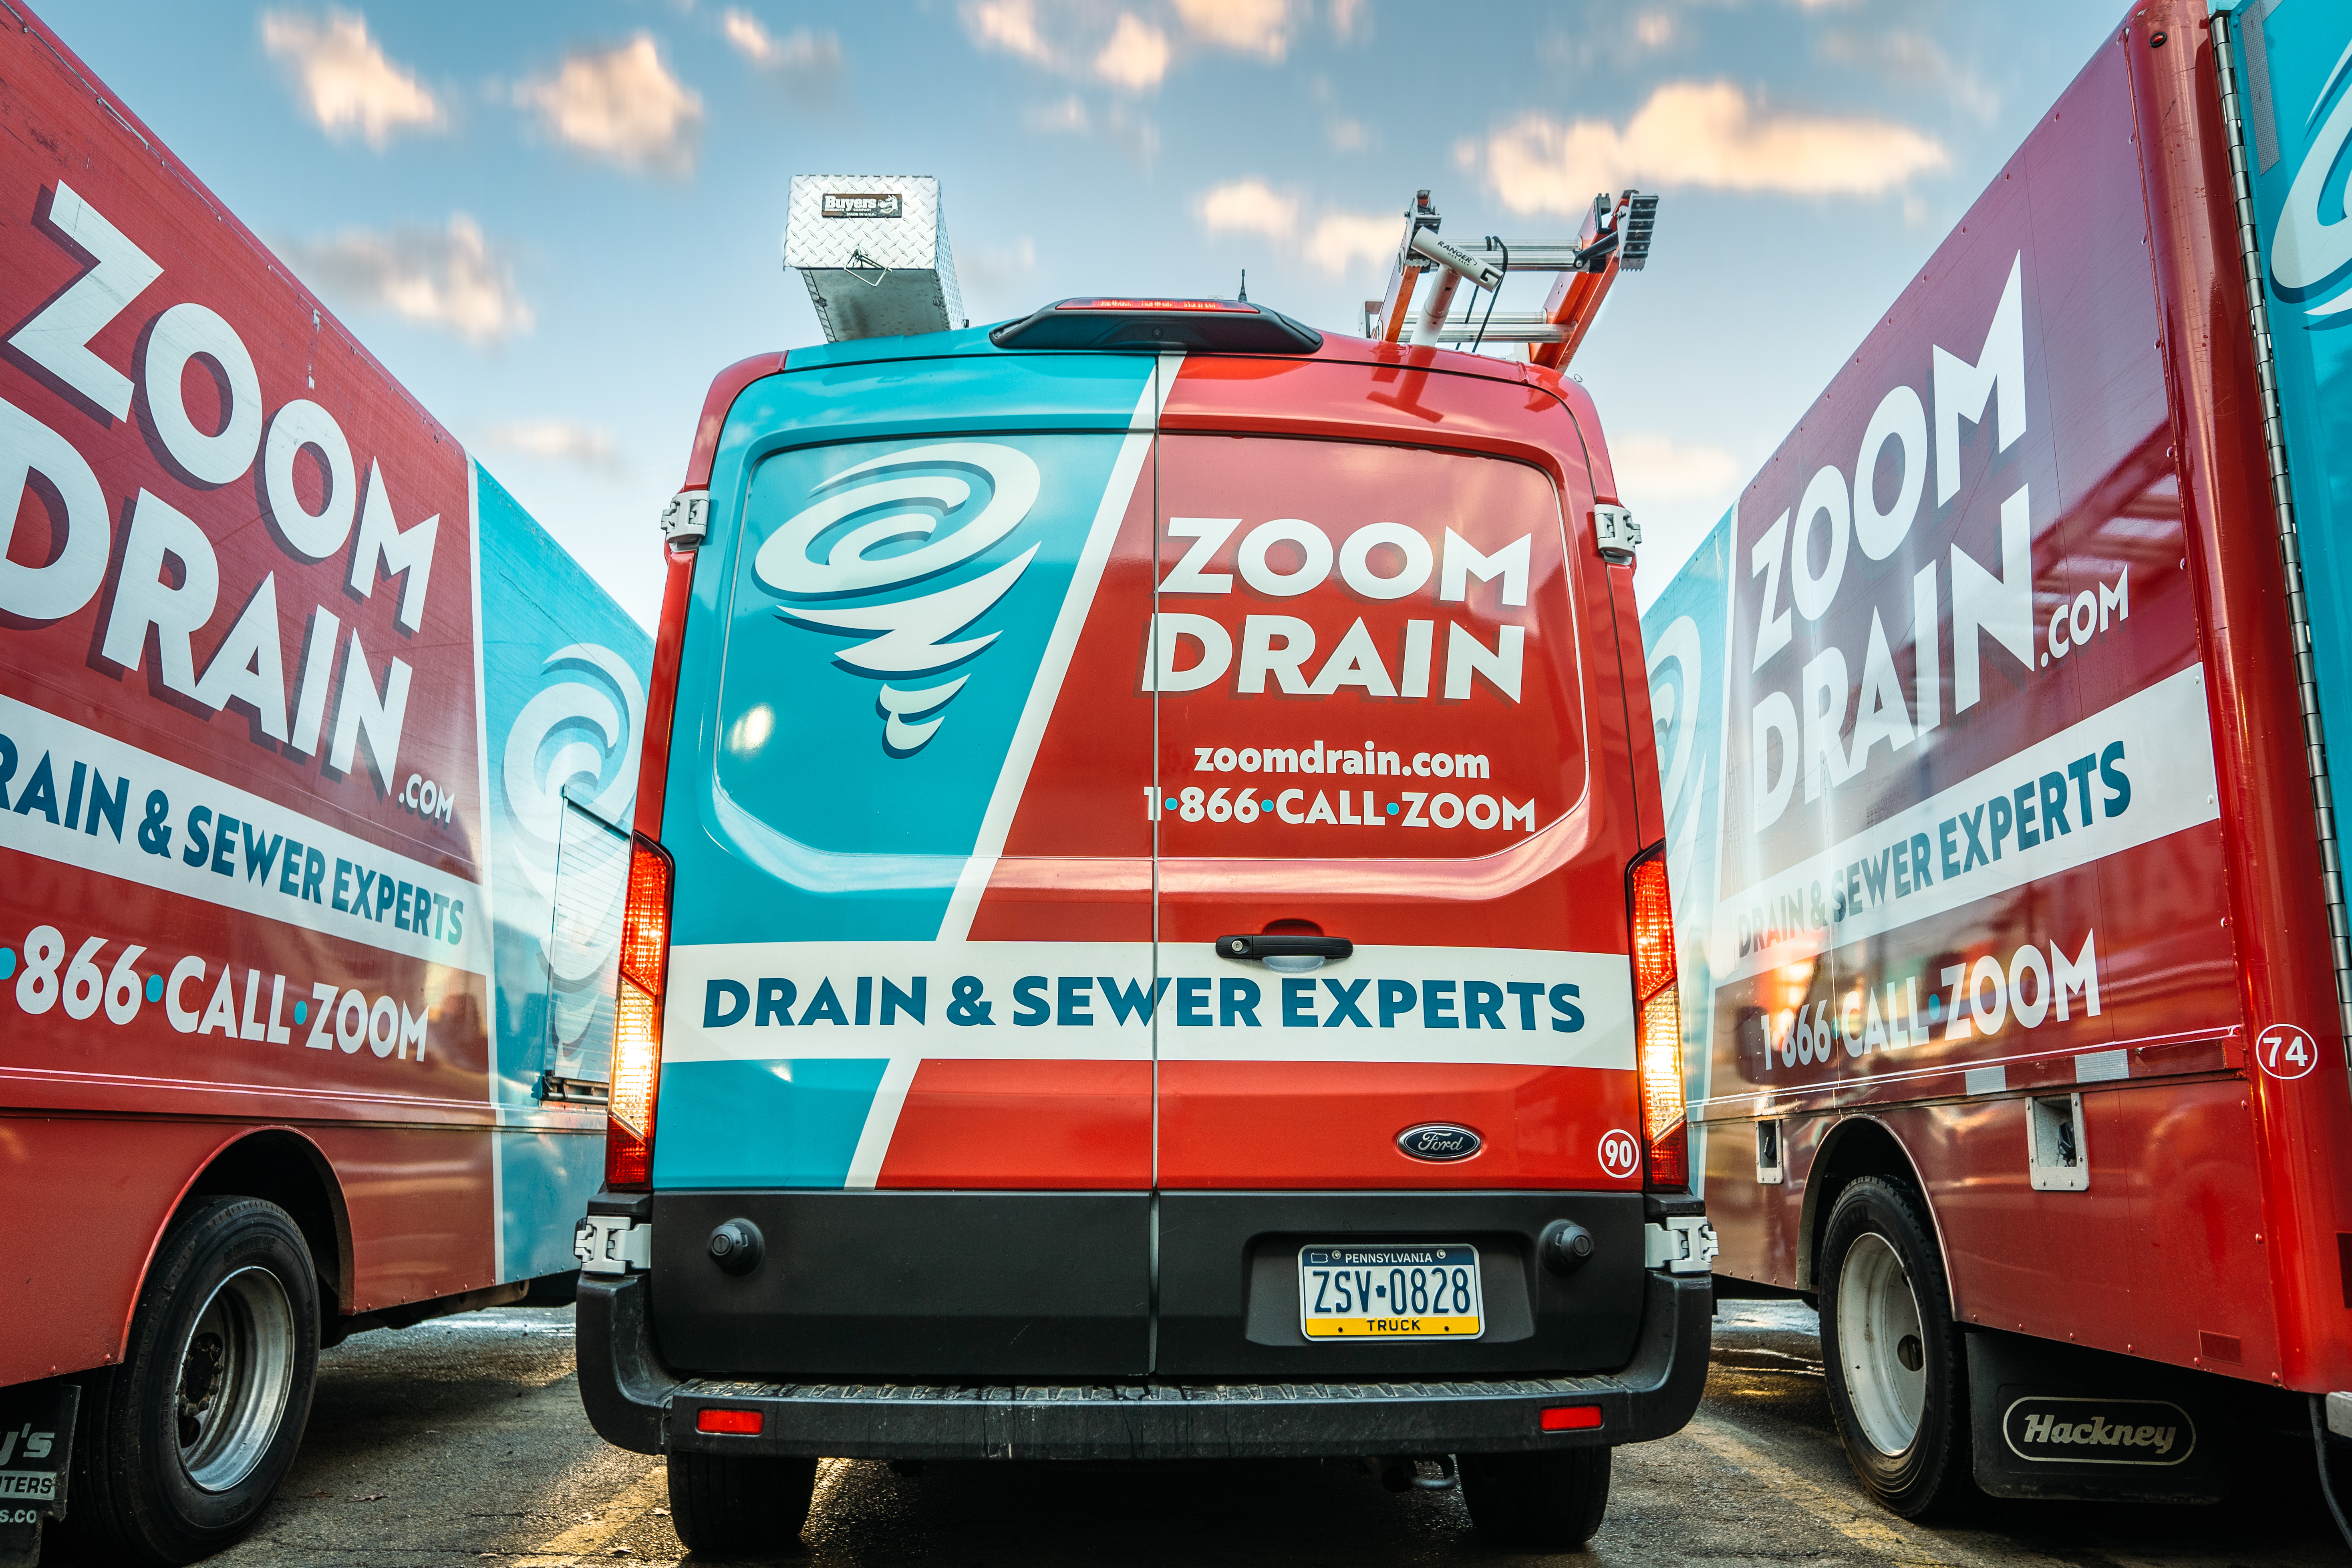 Now Open: Get To Know The Owners Of Zoom Drain Ocean County!